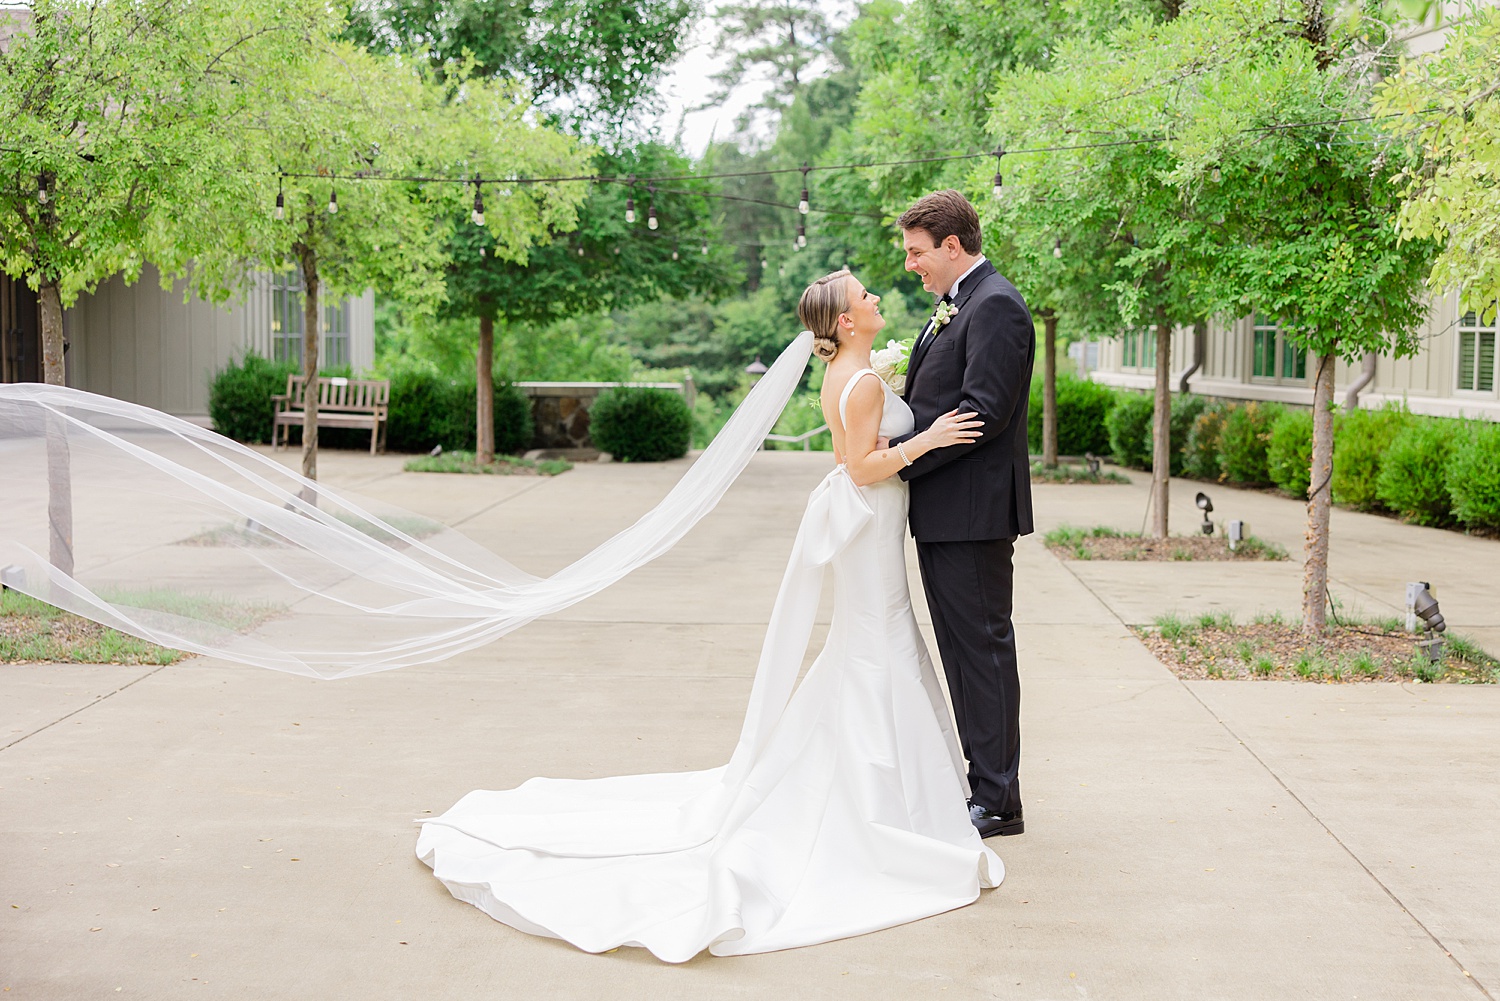 classic wedding portraits of 2022 with bride's veil trailing behind